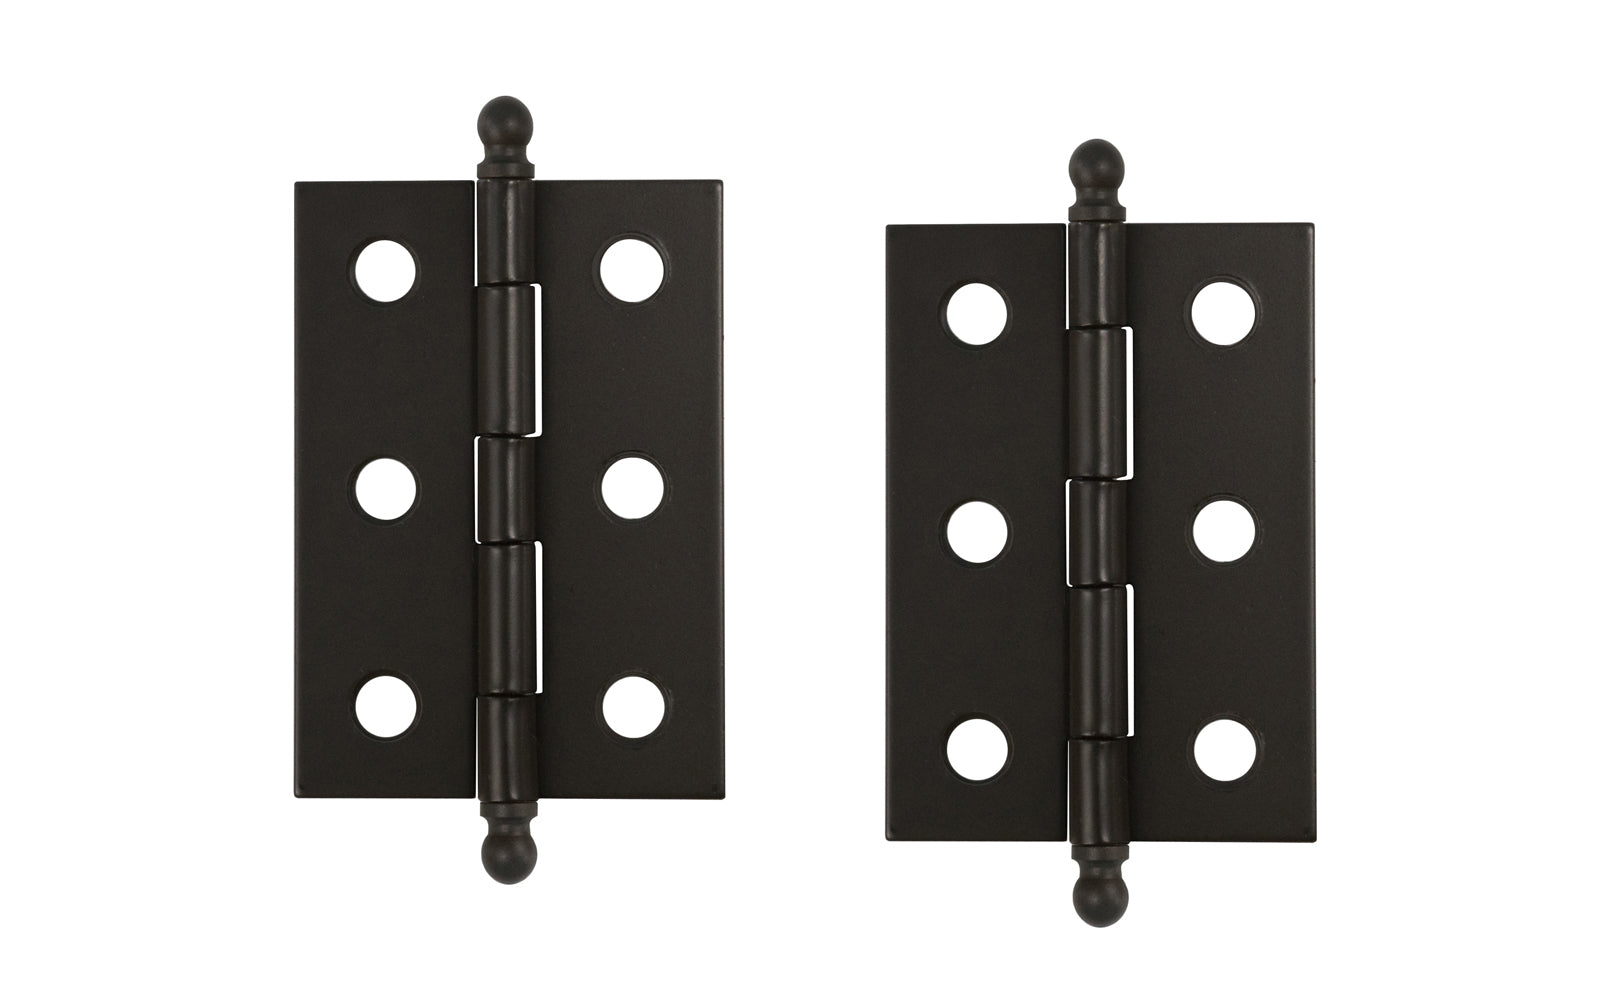 Traditional & classic ball-tip steel cabinet hinges with loose pins. Removable hinge pins which makes for easy installation when working with cabinets. 2" high x 1-3/8" wide. Sold as a pair of hinges. Oil Rubbed Bronze Finish.